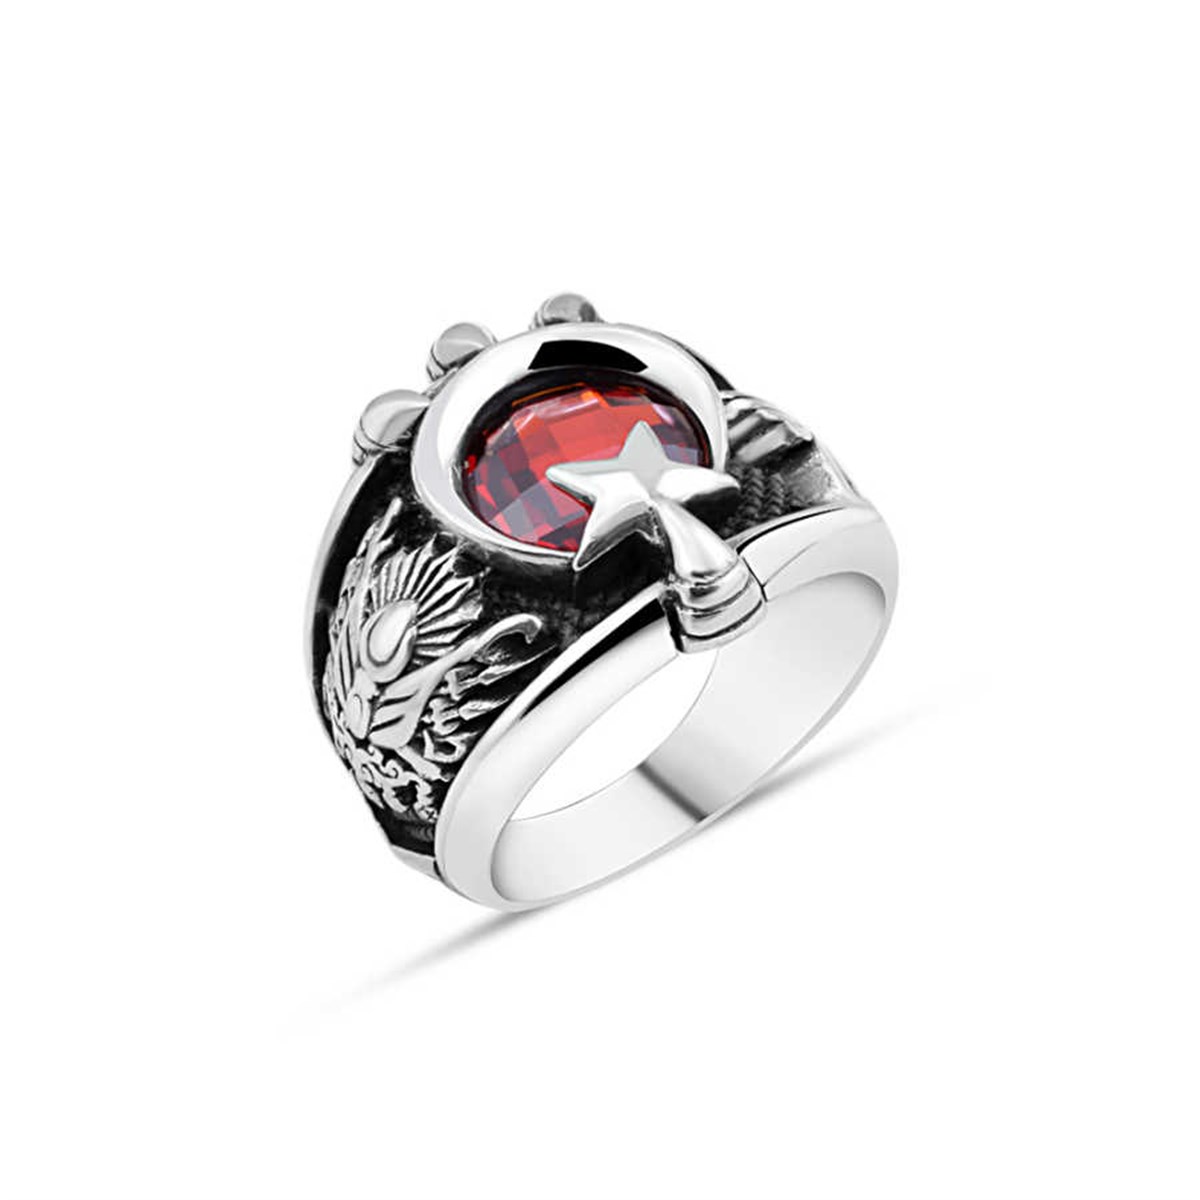 Red Zircon Stone Moon-Star Claw Sterling Silver Men's Ring